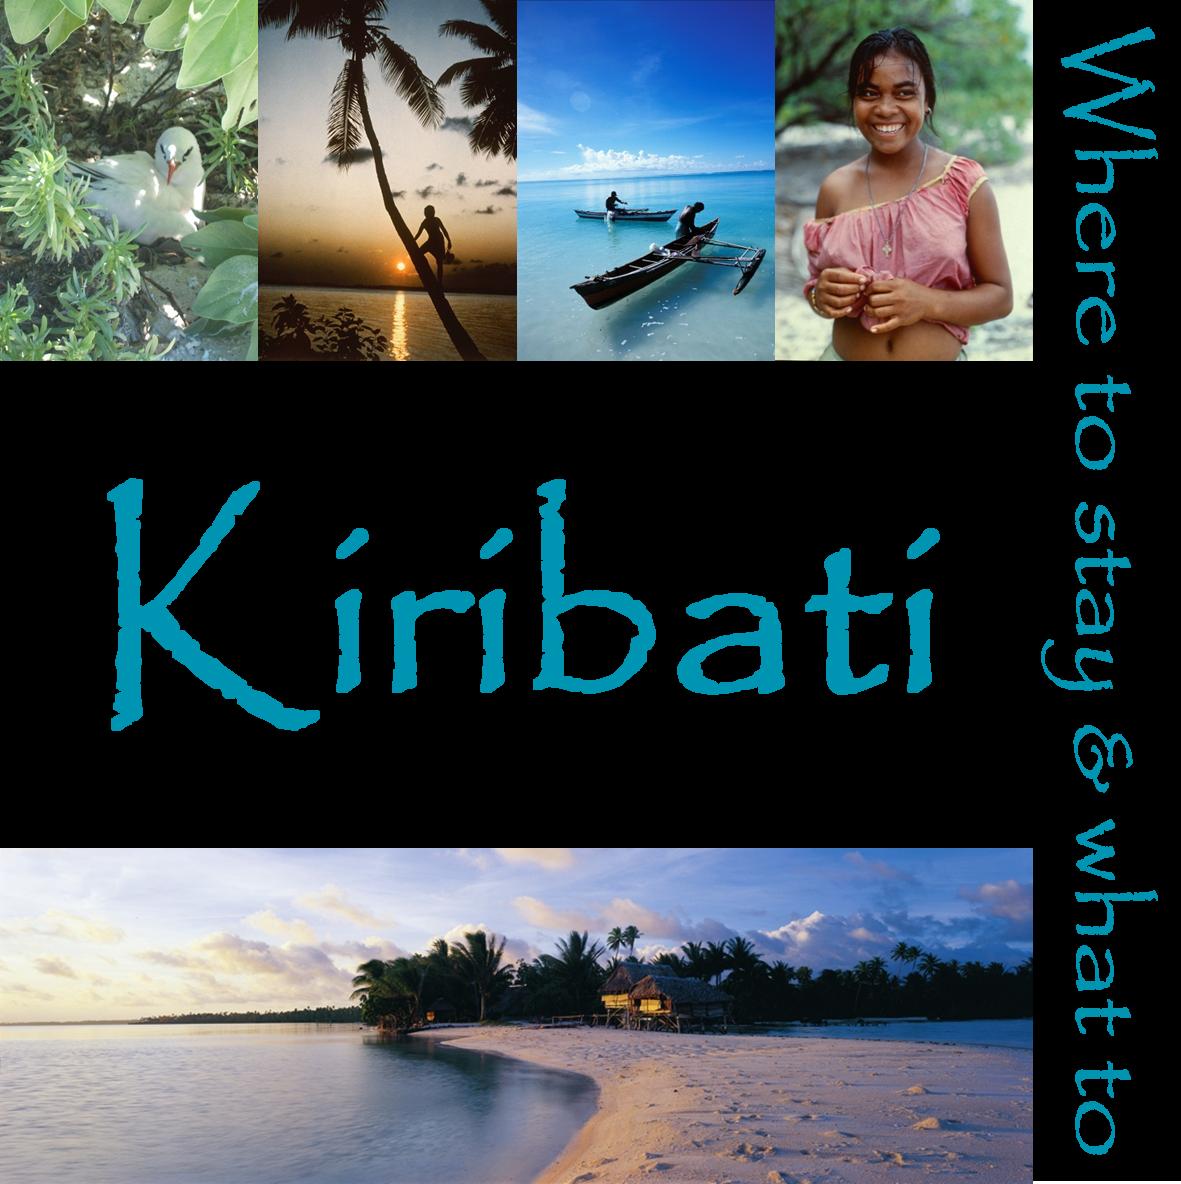 http://www.tobaraoi.com/res/Image/kiribati%20where%20to%20stay%20&%20what%20to%20do(1).jpg